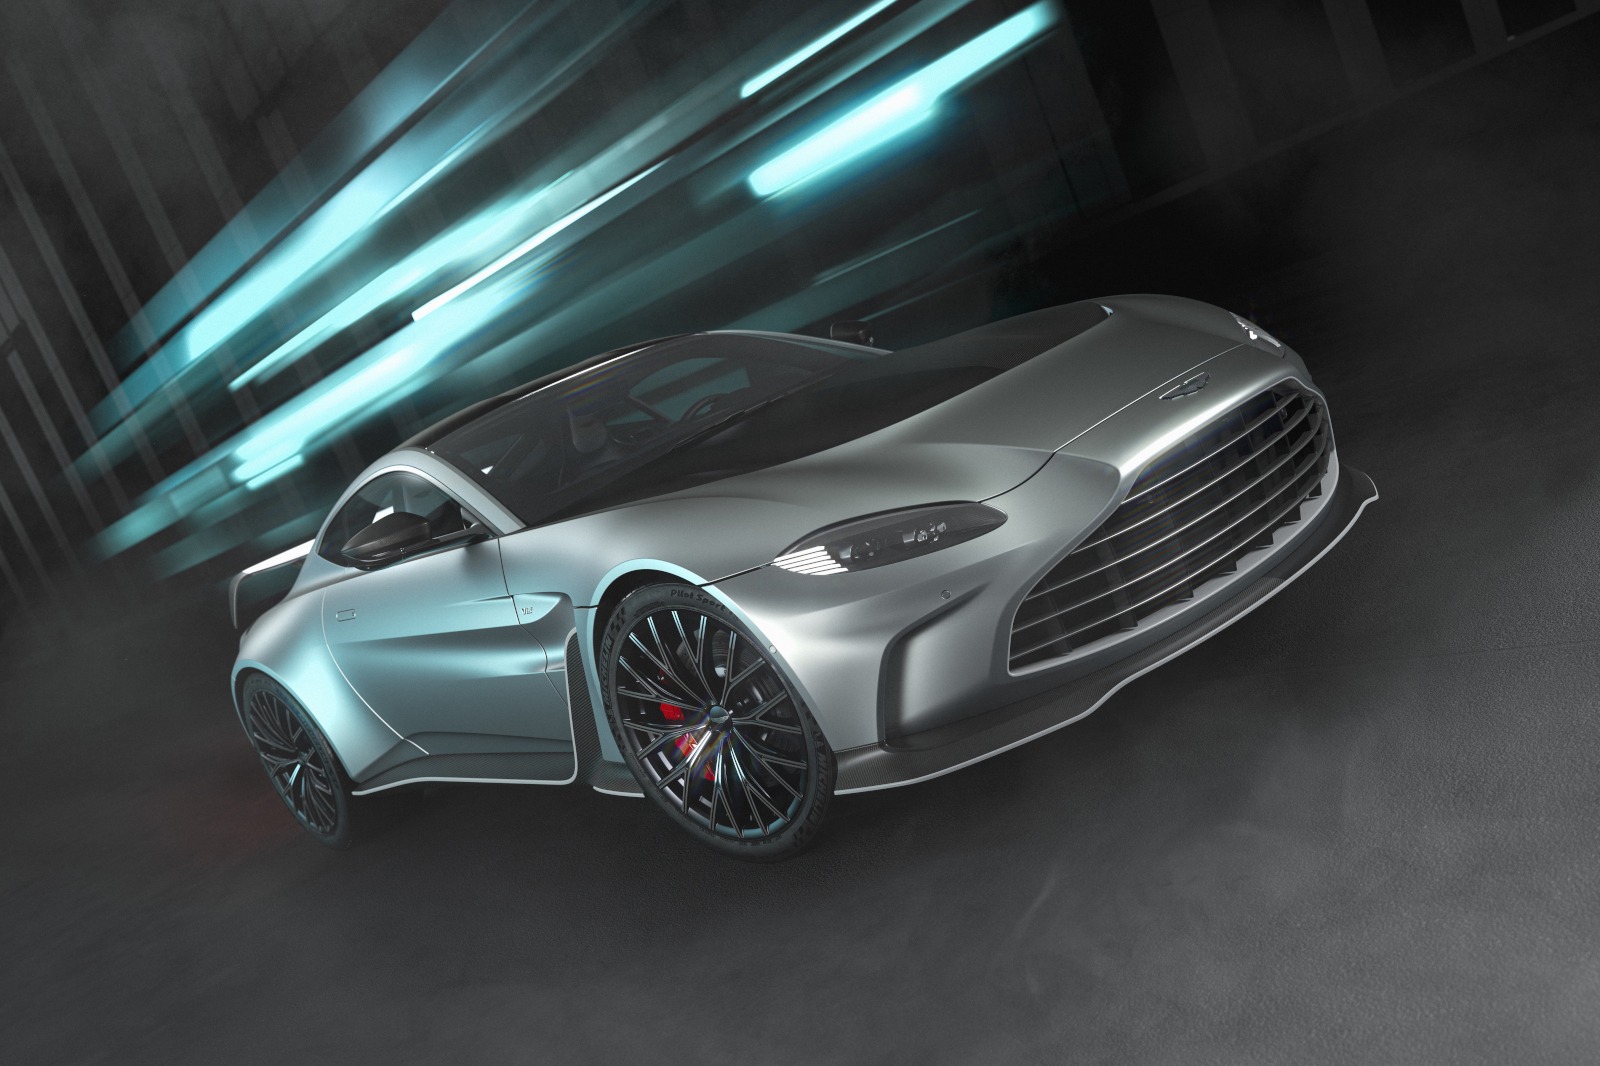 Limited-Edition 2023 Aston Martin V12 Vantage Marks the End of an Era